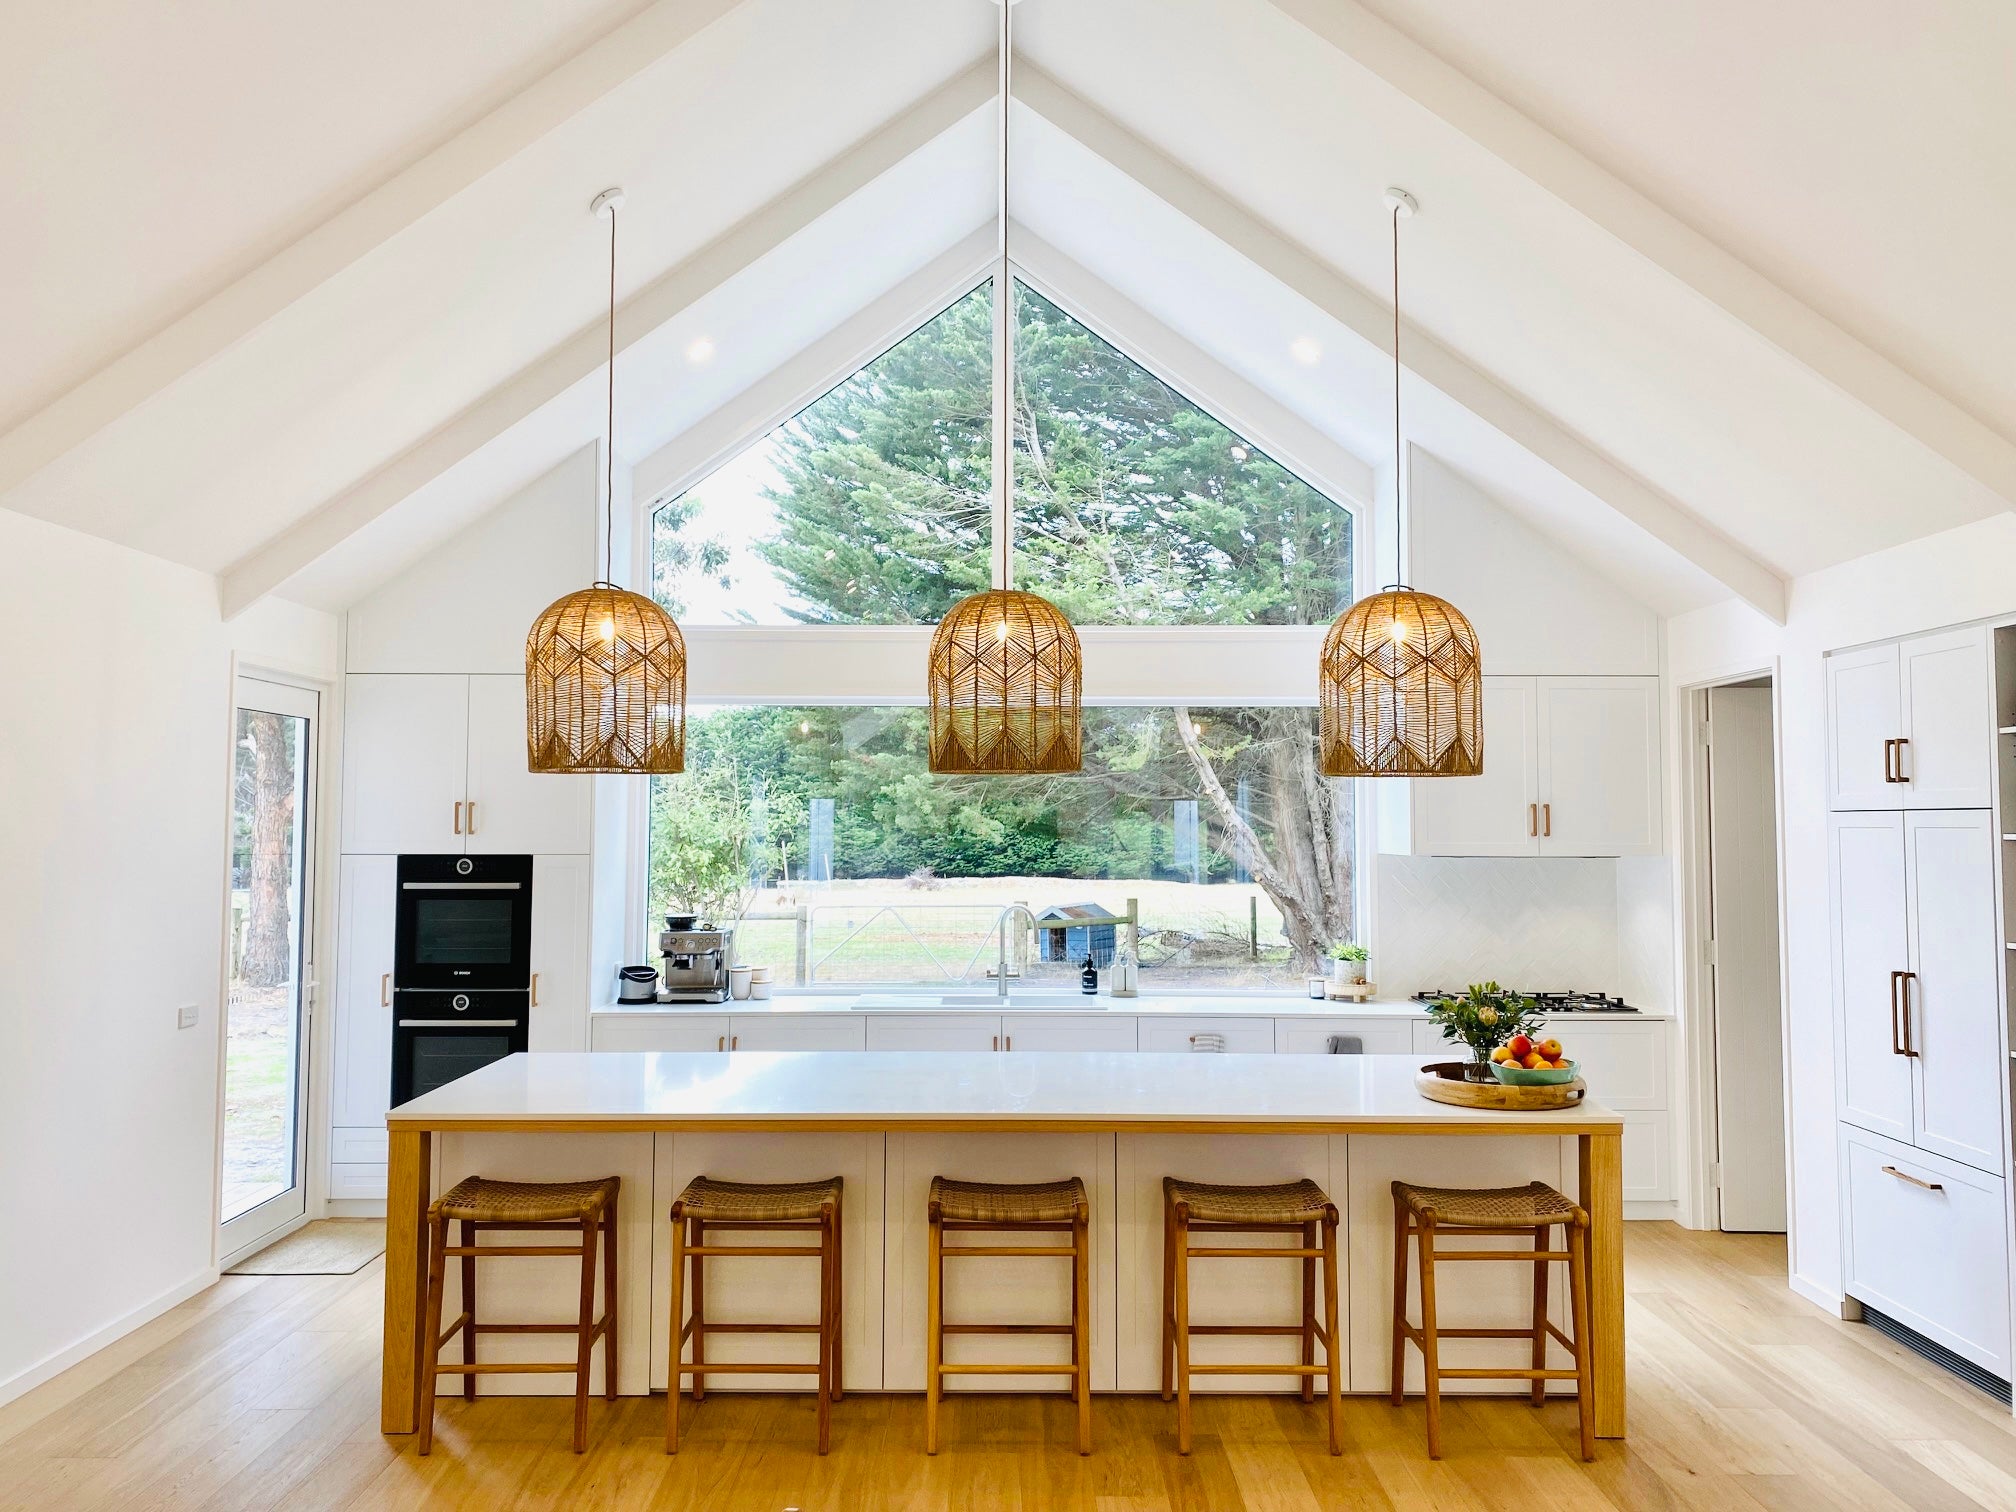 Three Airlie large natural kitchen feature lights hang above a large kitchen island bench.